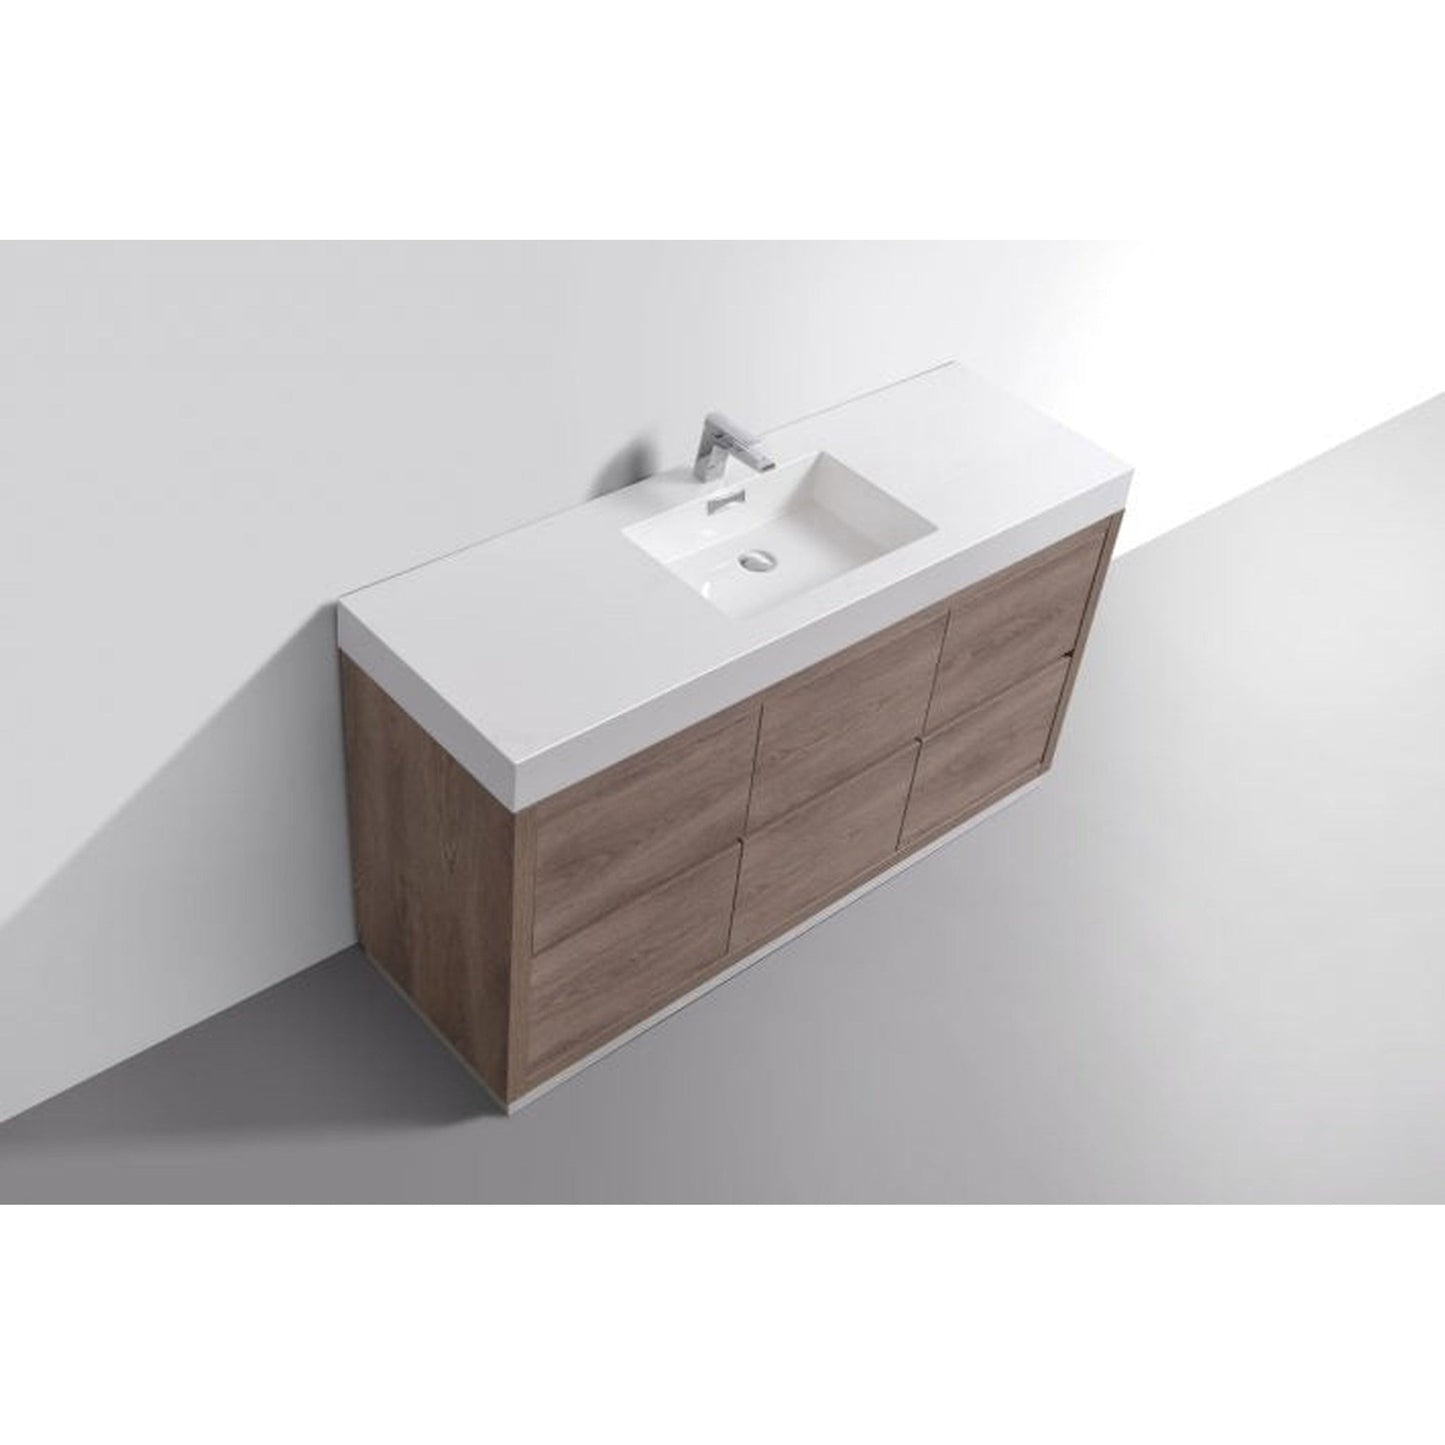 KubeBath Bliss 60" Butternut Freestanding Modern Bathroom Vanity With Single Integrated Acrylic Sink With Overflow and 60" Butternut Framed Mirror With Shelf